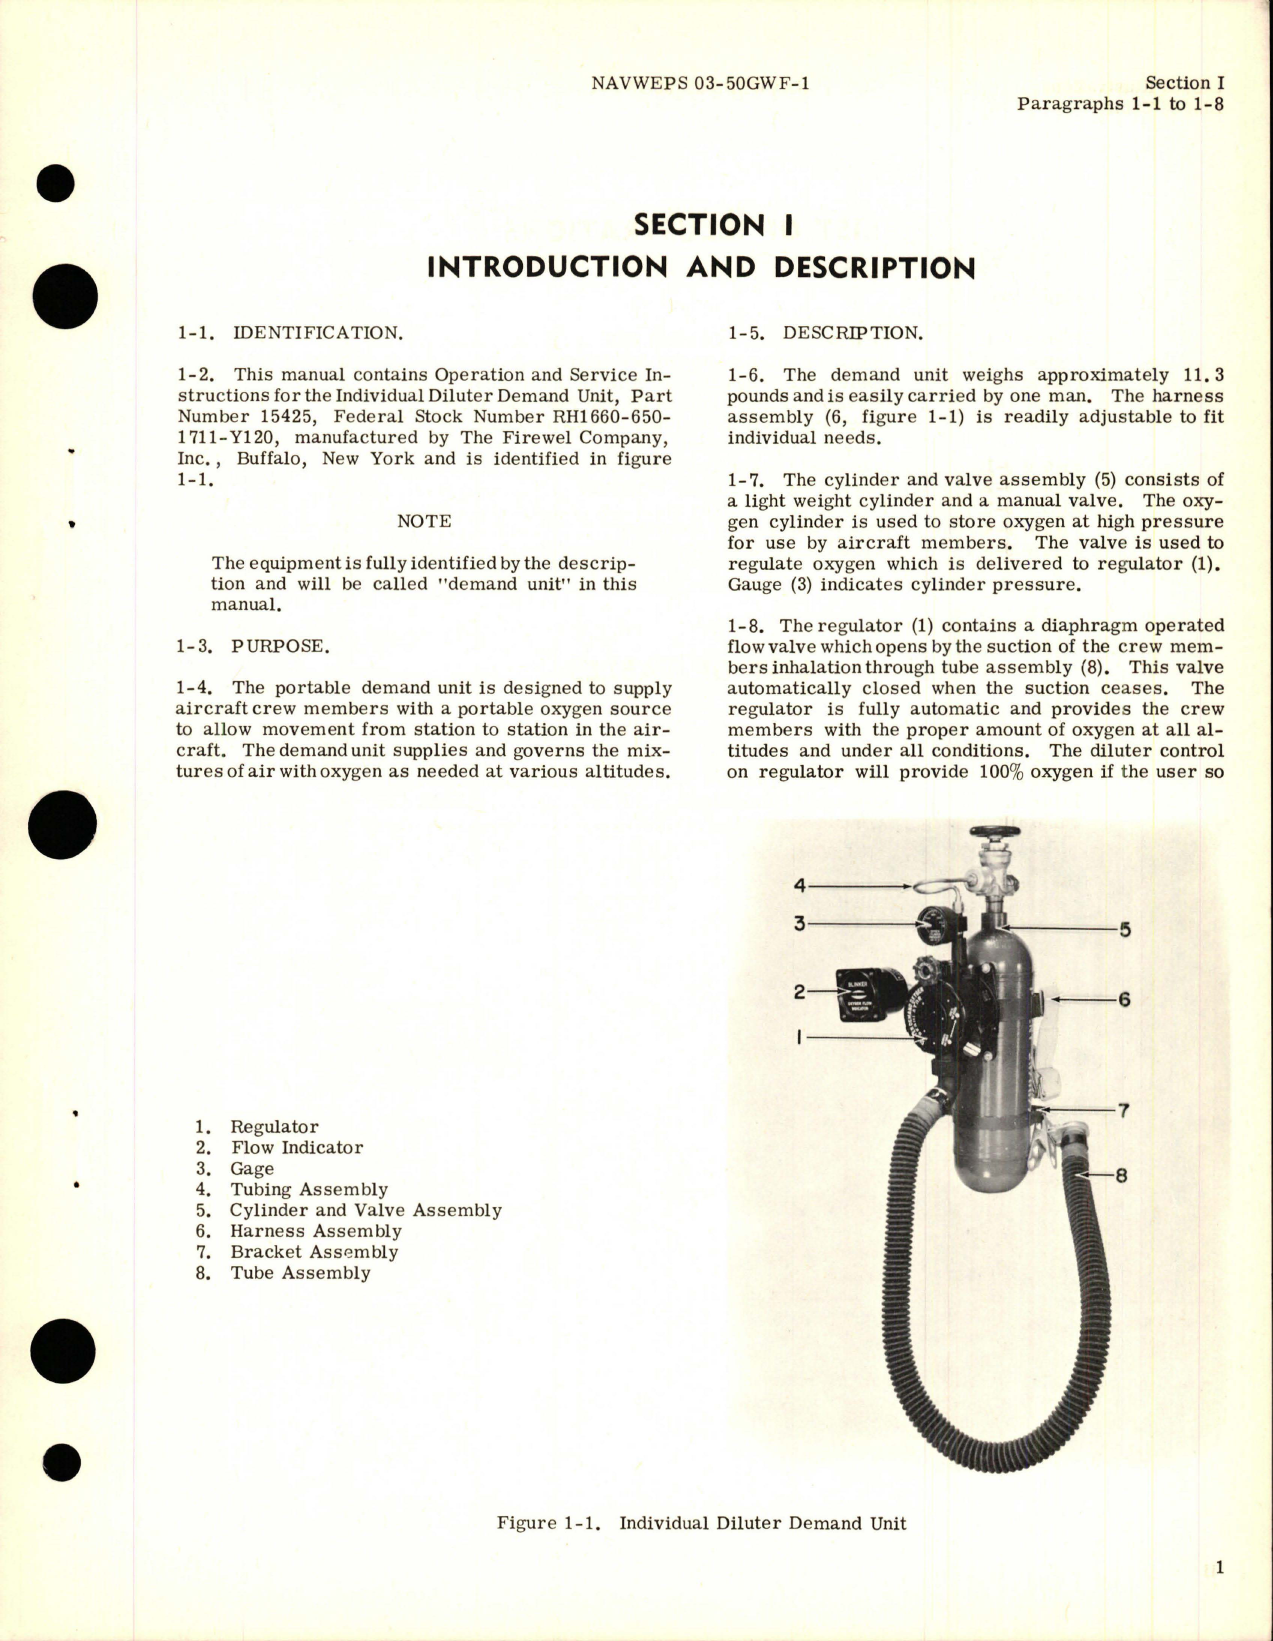 Sample page 5 from AirCorps Library document: Operation & Service Instructions with Illustrated Parts Breakdown for Individual Diluter Demand Unit - Part 15425